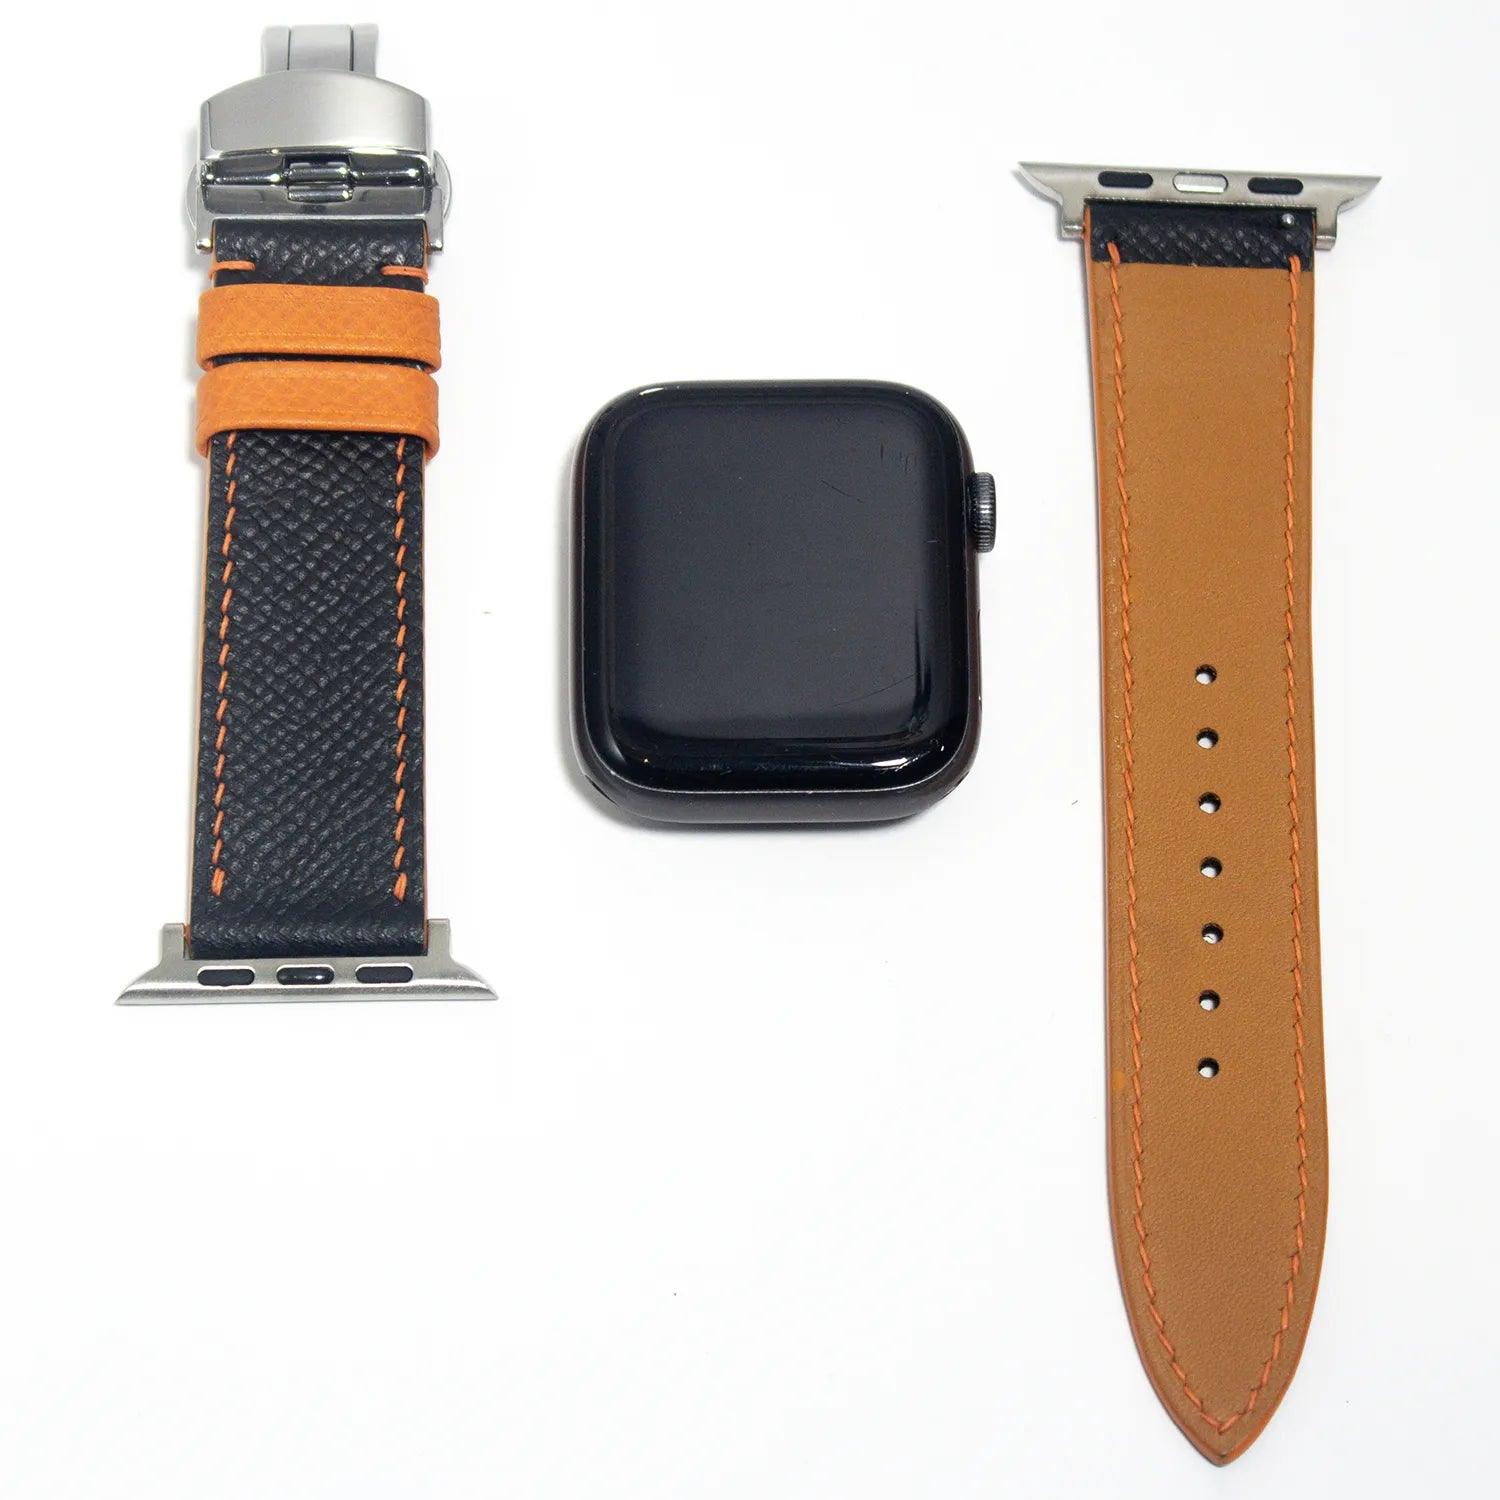 Fashion-forward apple watch straps in black Epsom leather, accented with orange stitching, ideal for adding a splash of color to any outfit.